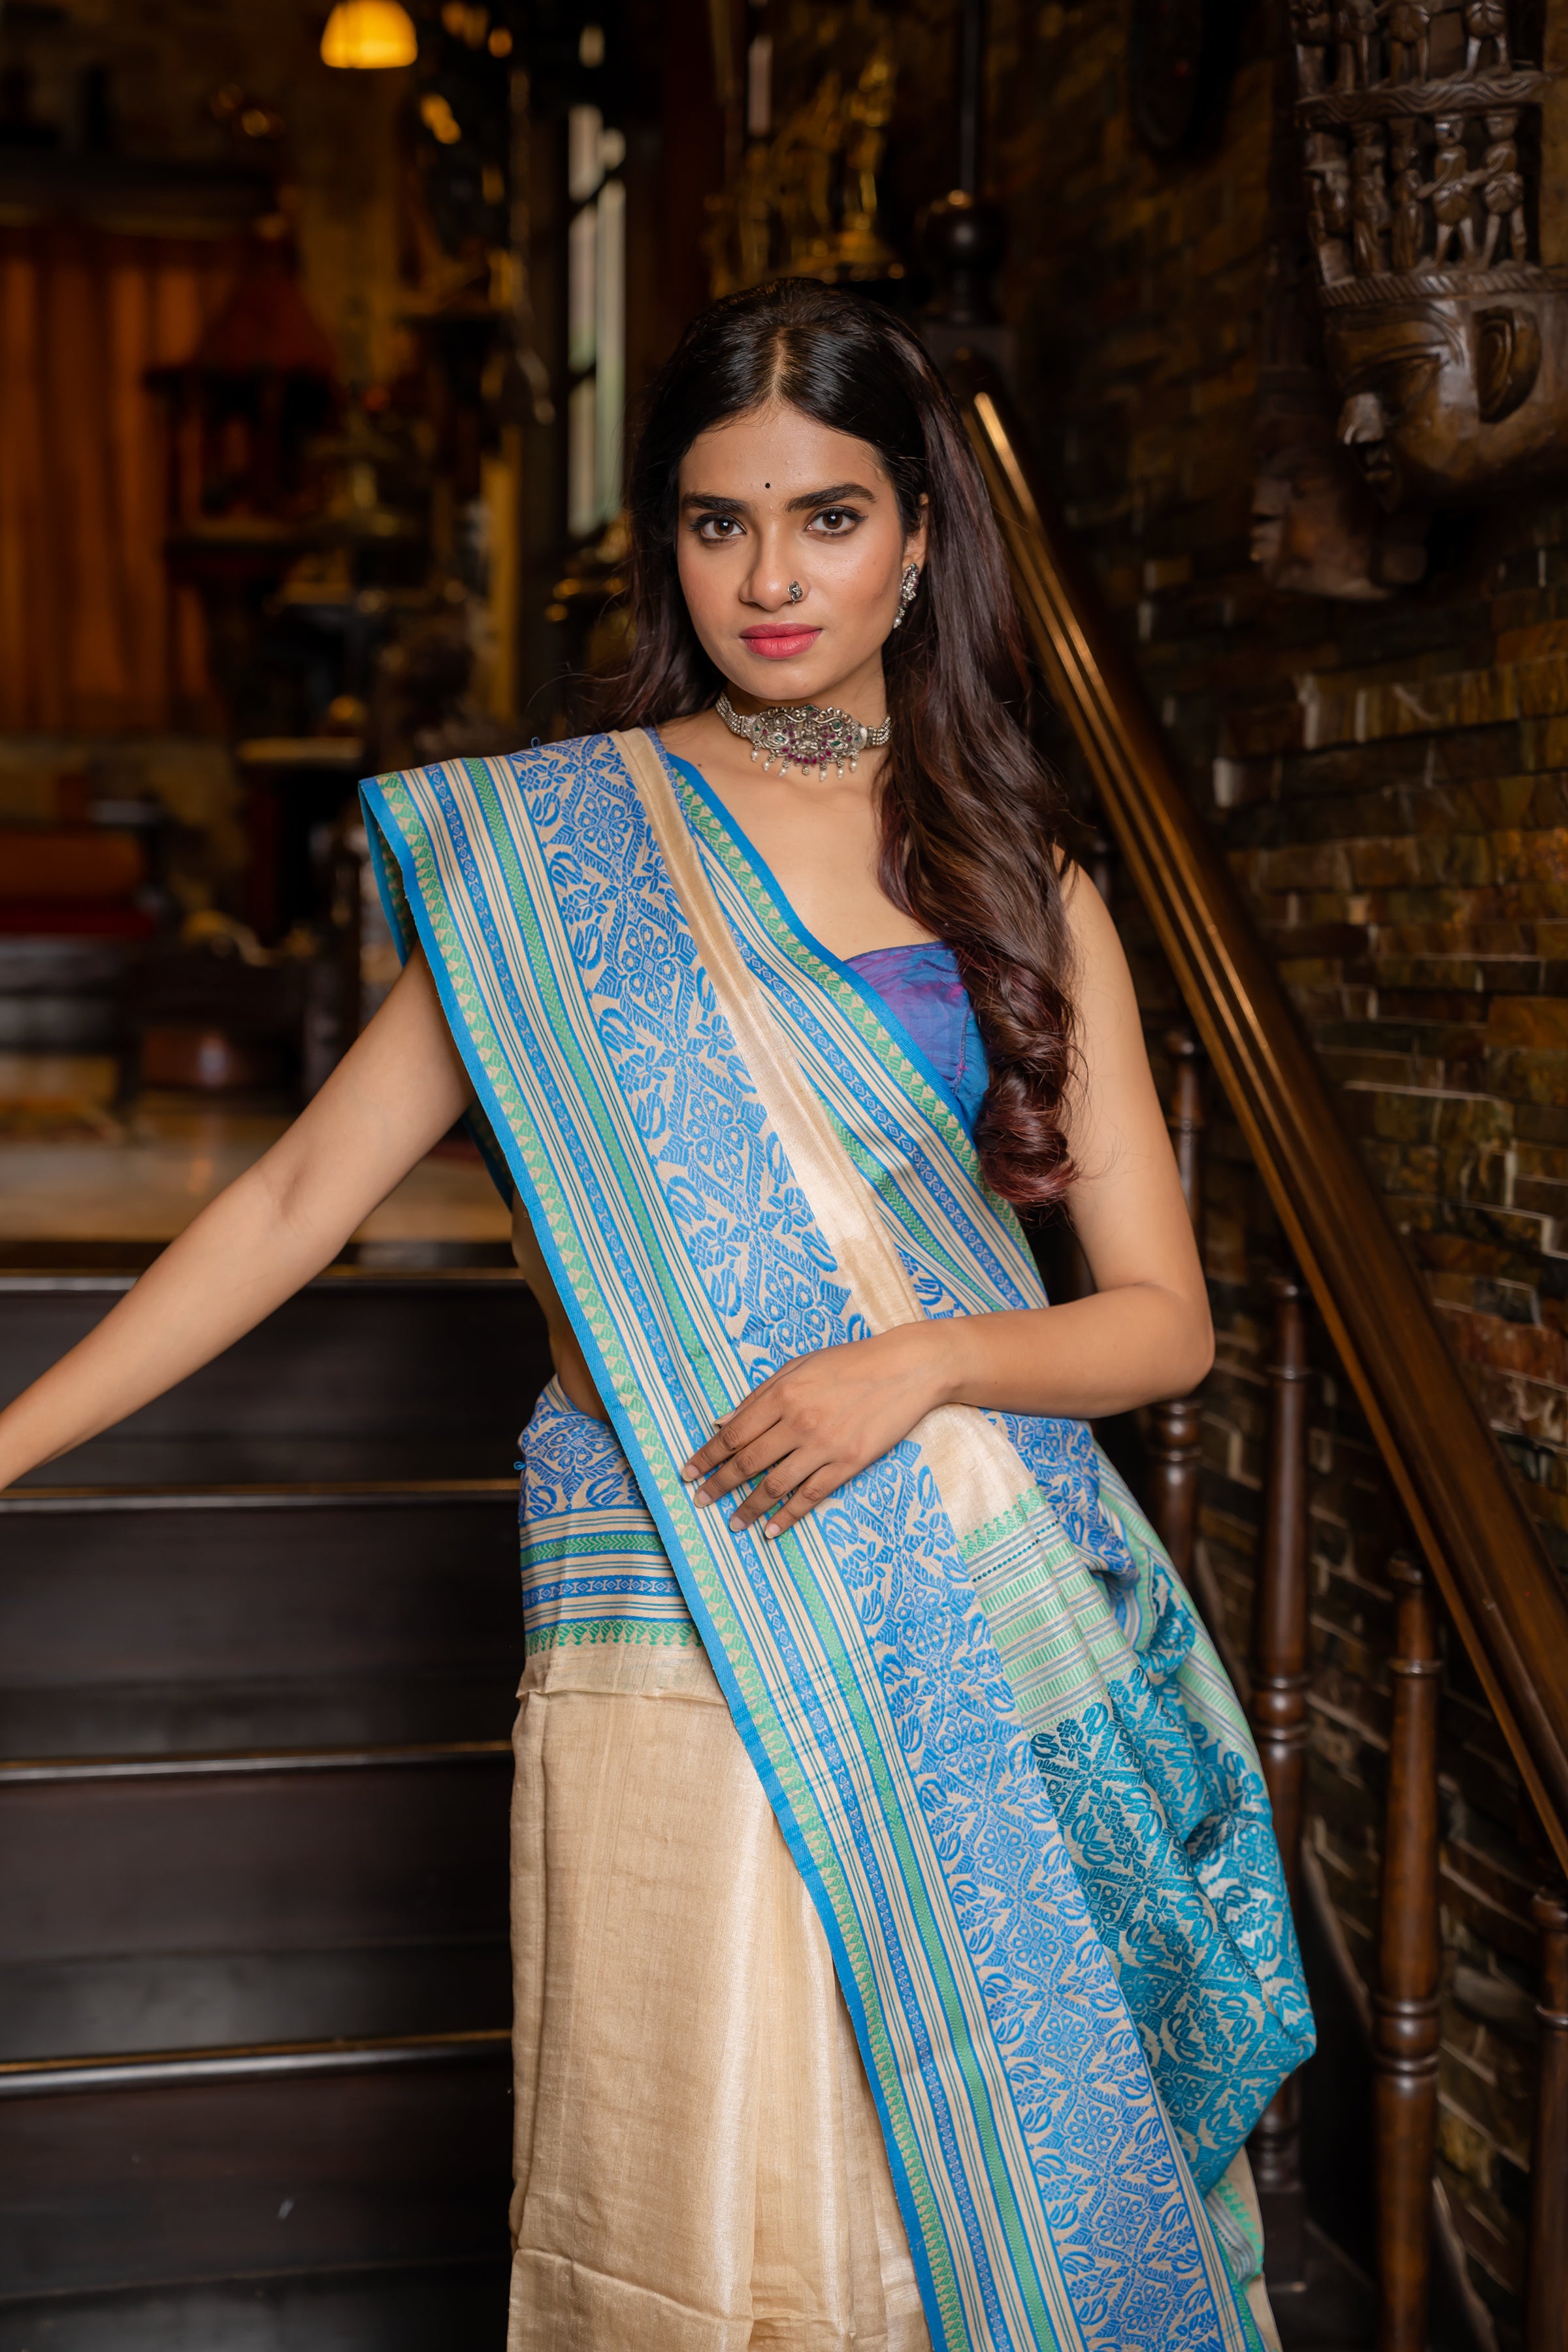 Bengal tussar in natural tussar and blue colour with detailed weaving in border